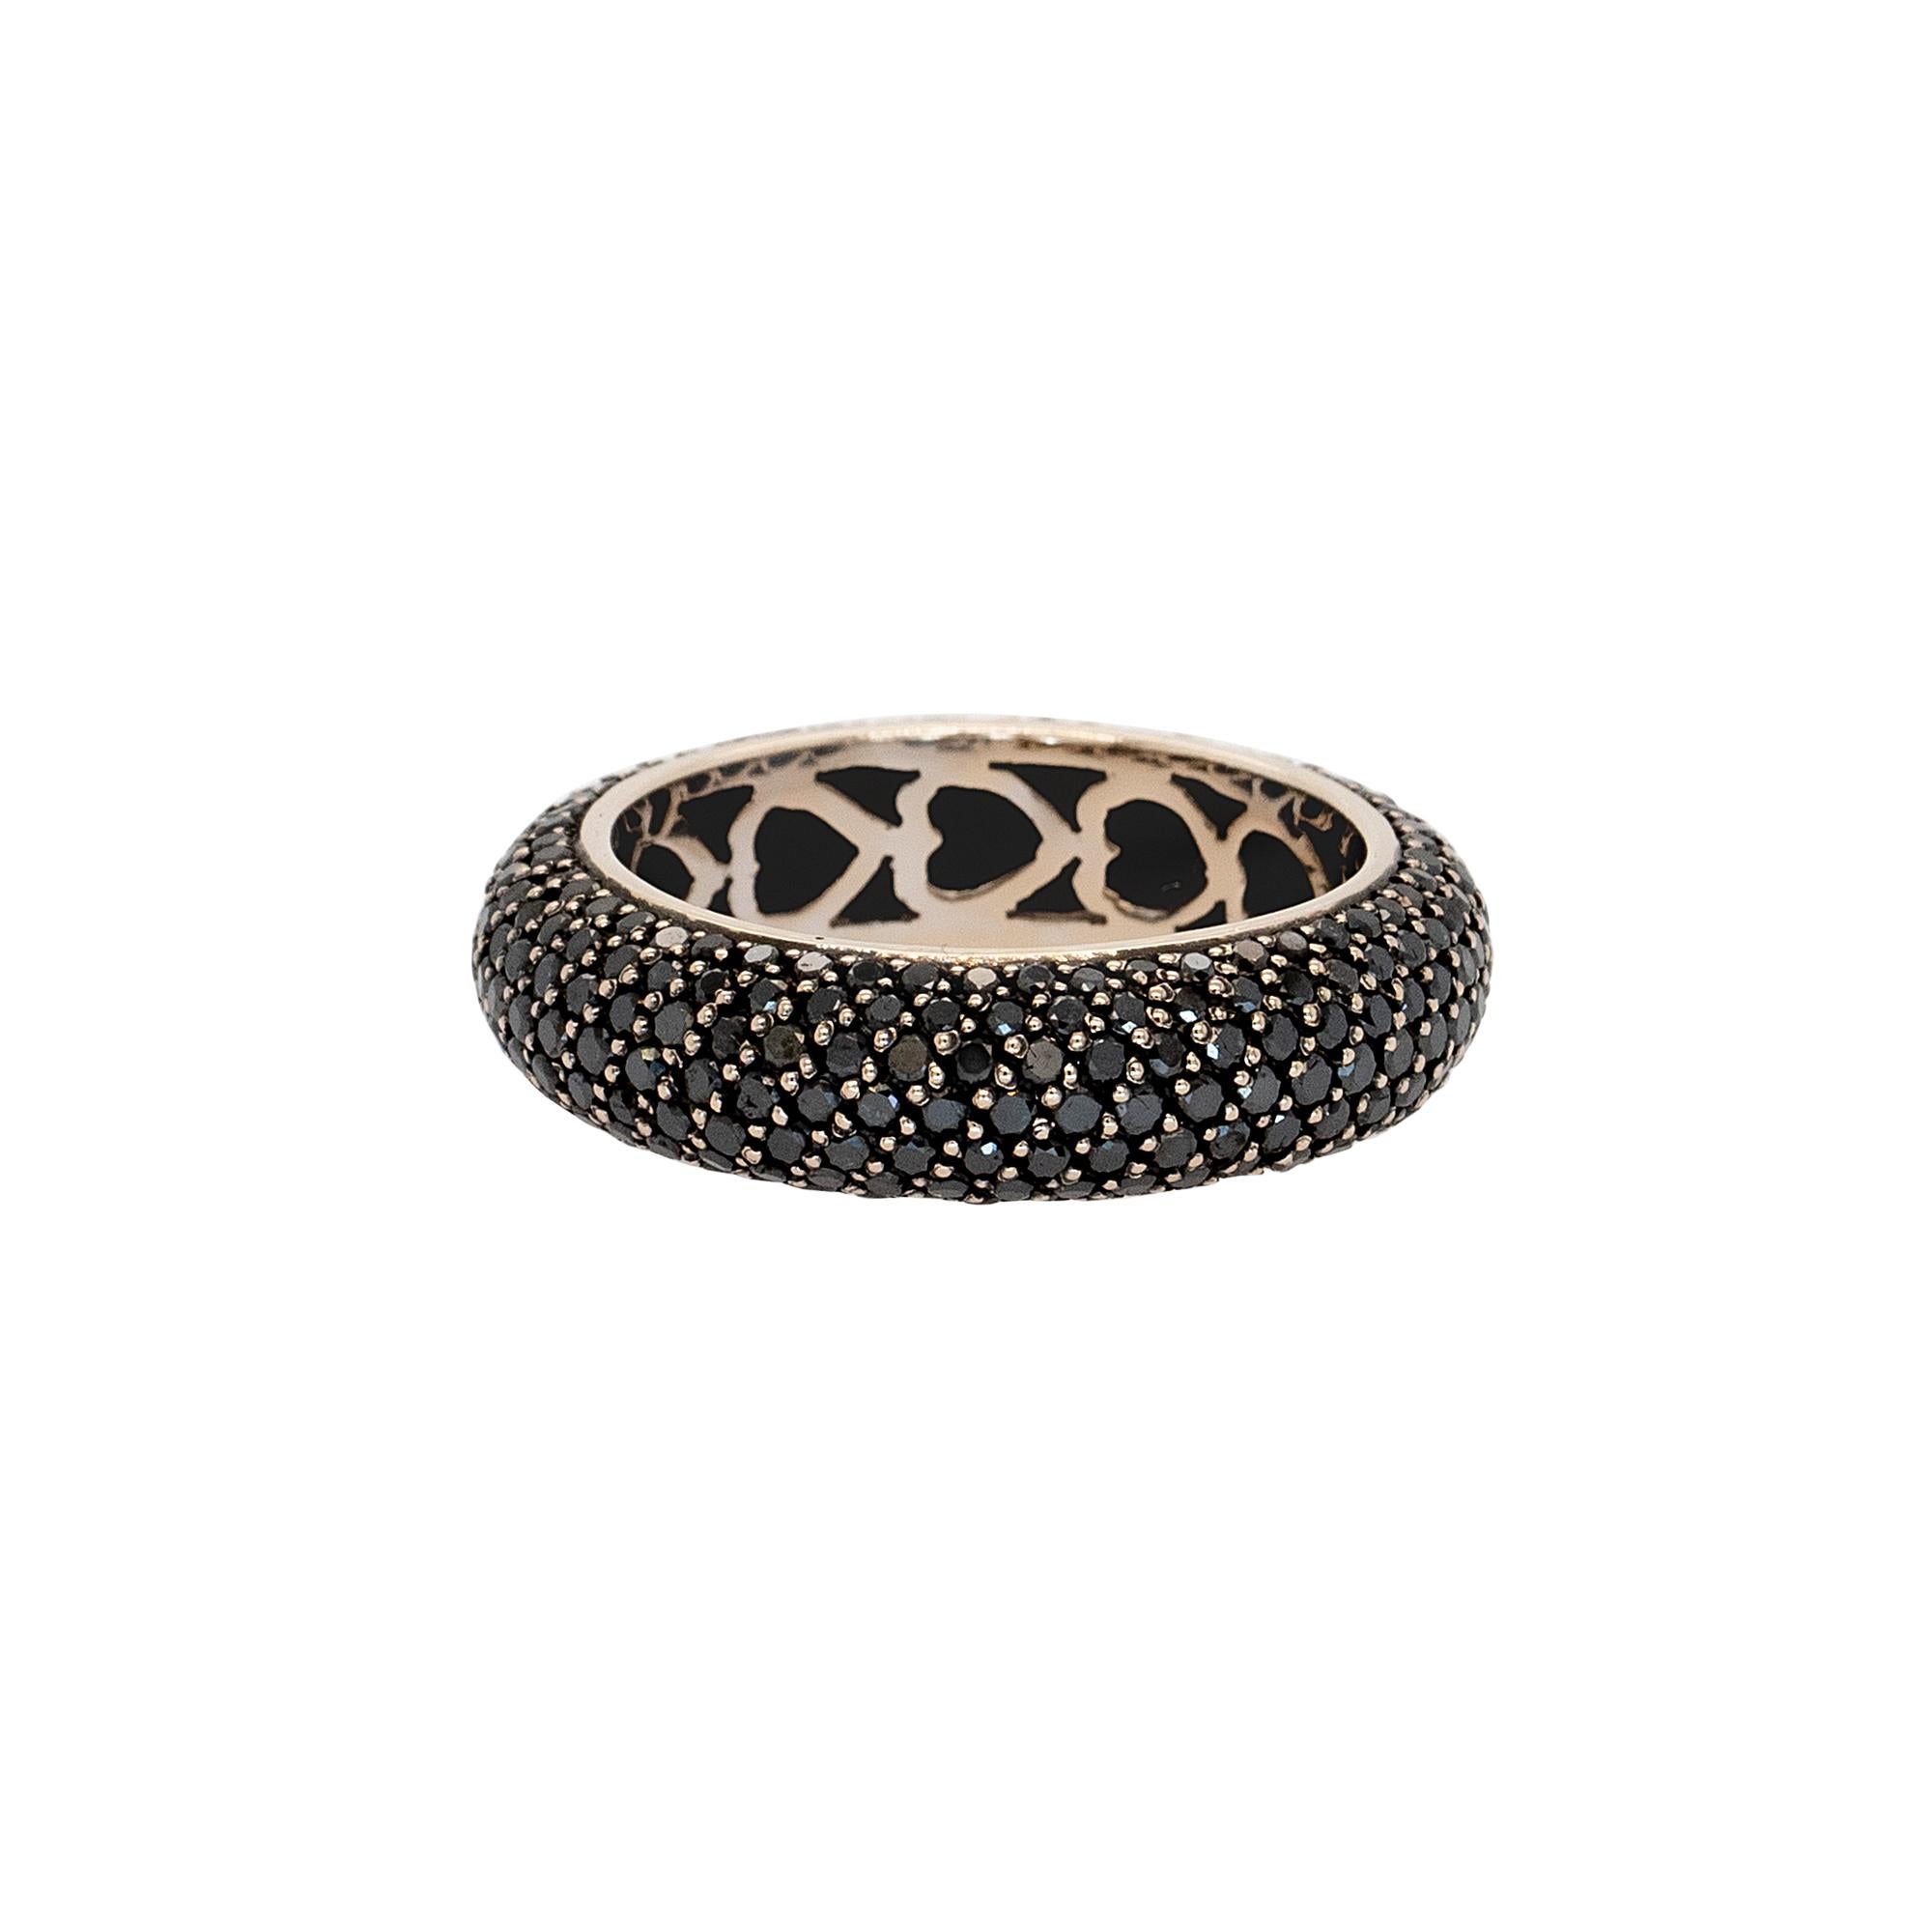 Diamond Details: 
Black Rhodium
Approx 1.5ct
Ring Material: Platinum
Ring Size: 8.5 (can be sized)
Total Weight: 6.06g (3.89dwt)
This item comes with a presentation box!
SKU: R6319

This Platinum Black Rhodium Pave Eternity Ring is the epitome of